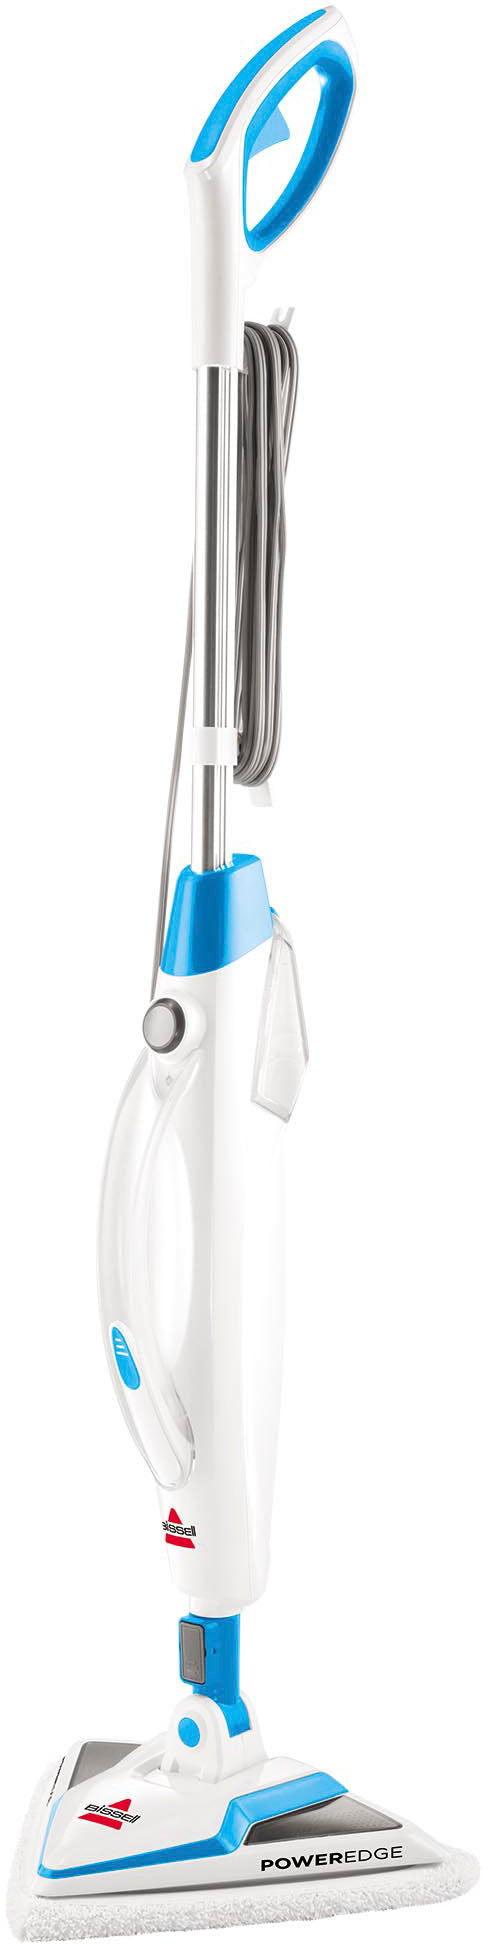 BISSELL - PowerEdge Lift-Off 2-in-1 Sanitizing Steam Mop - Basanova Blue with White Accents_1